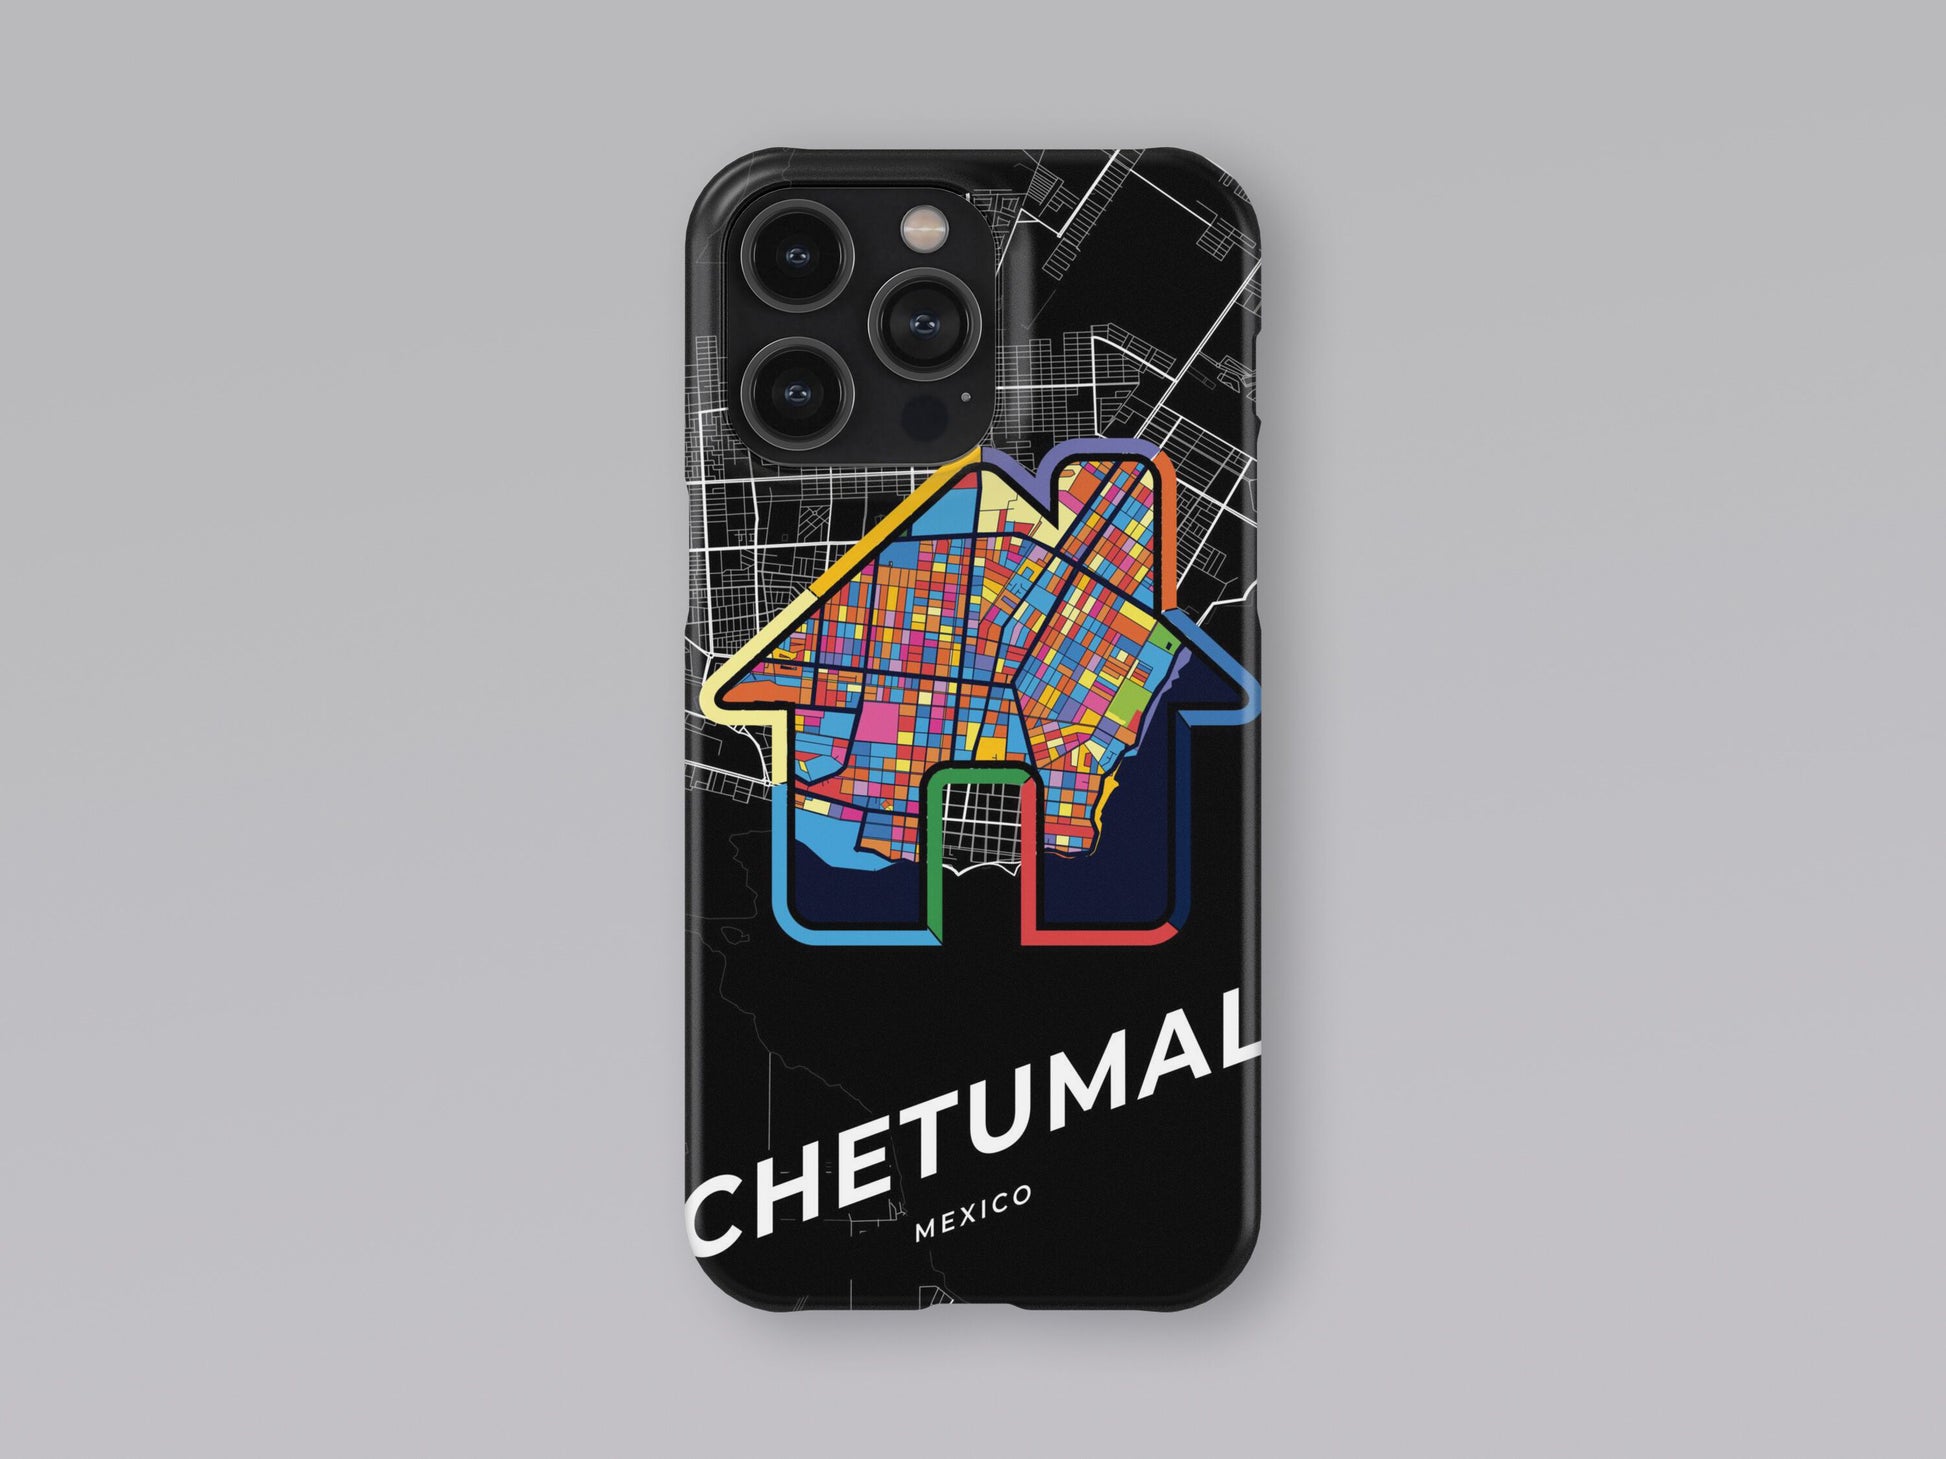 Chetumal Mexico slim phone case with colorful icon. Birthday, wedding or housewarming gift. Couple match cases. 3